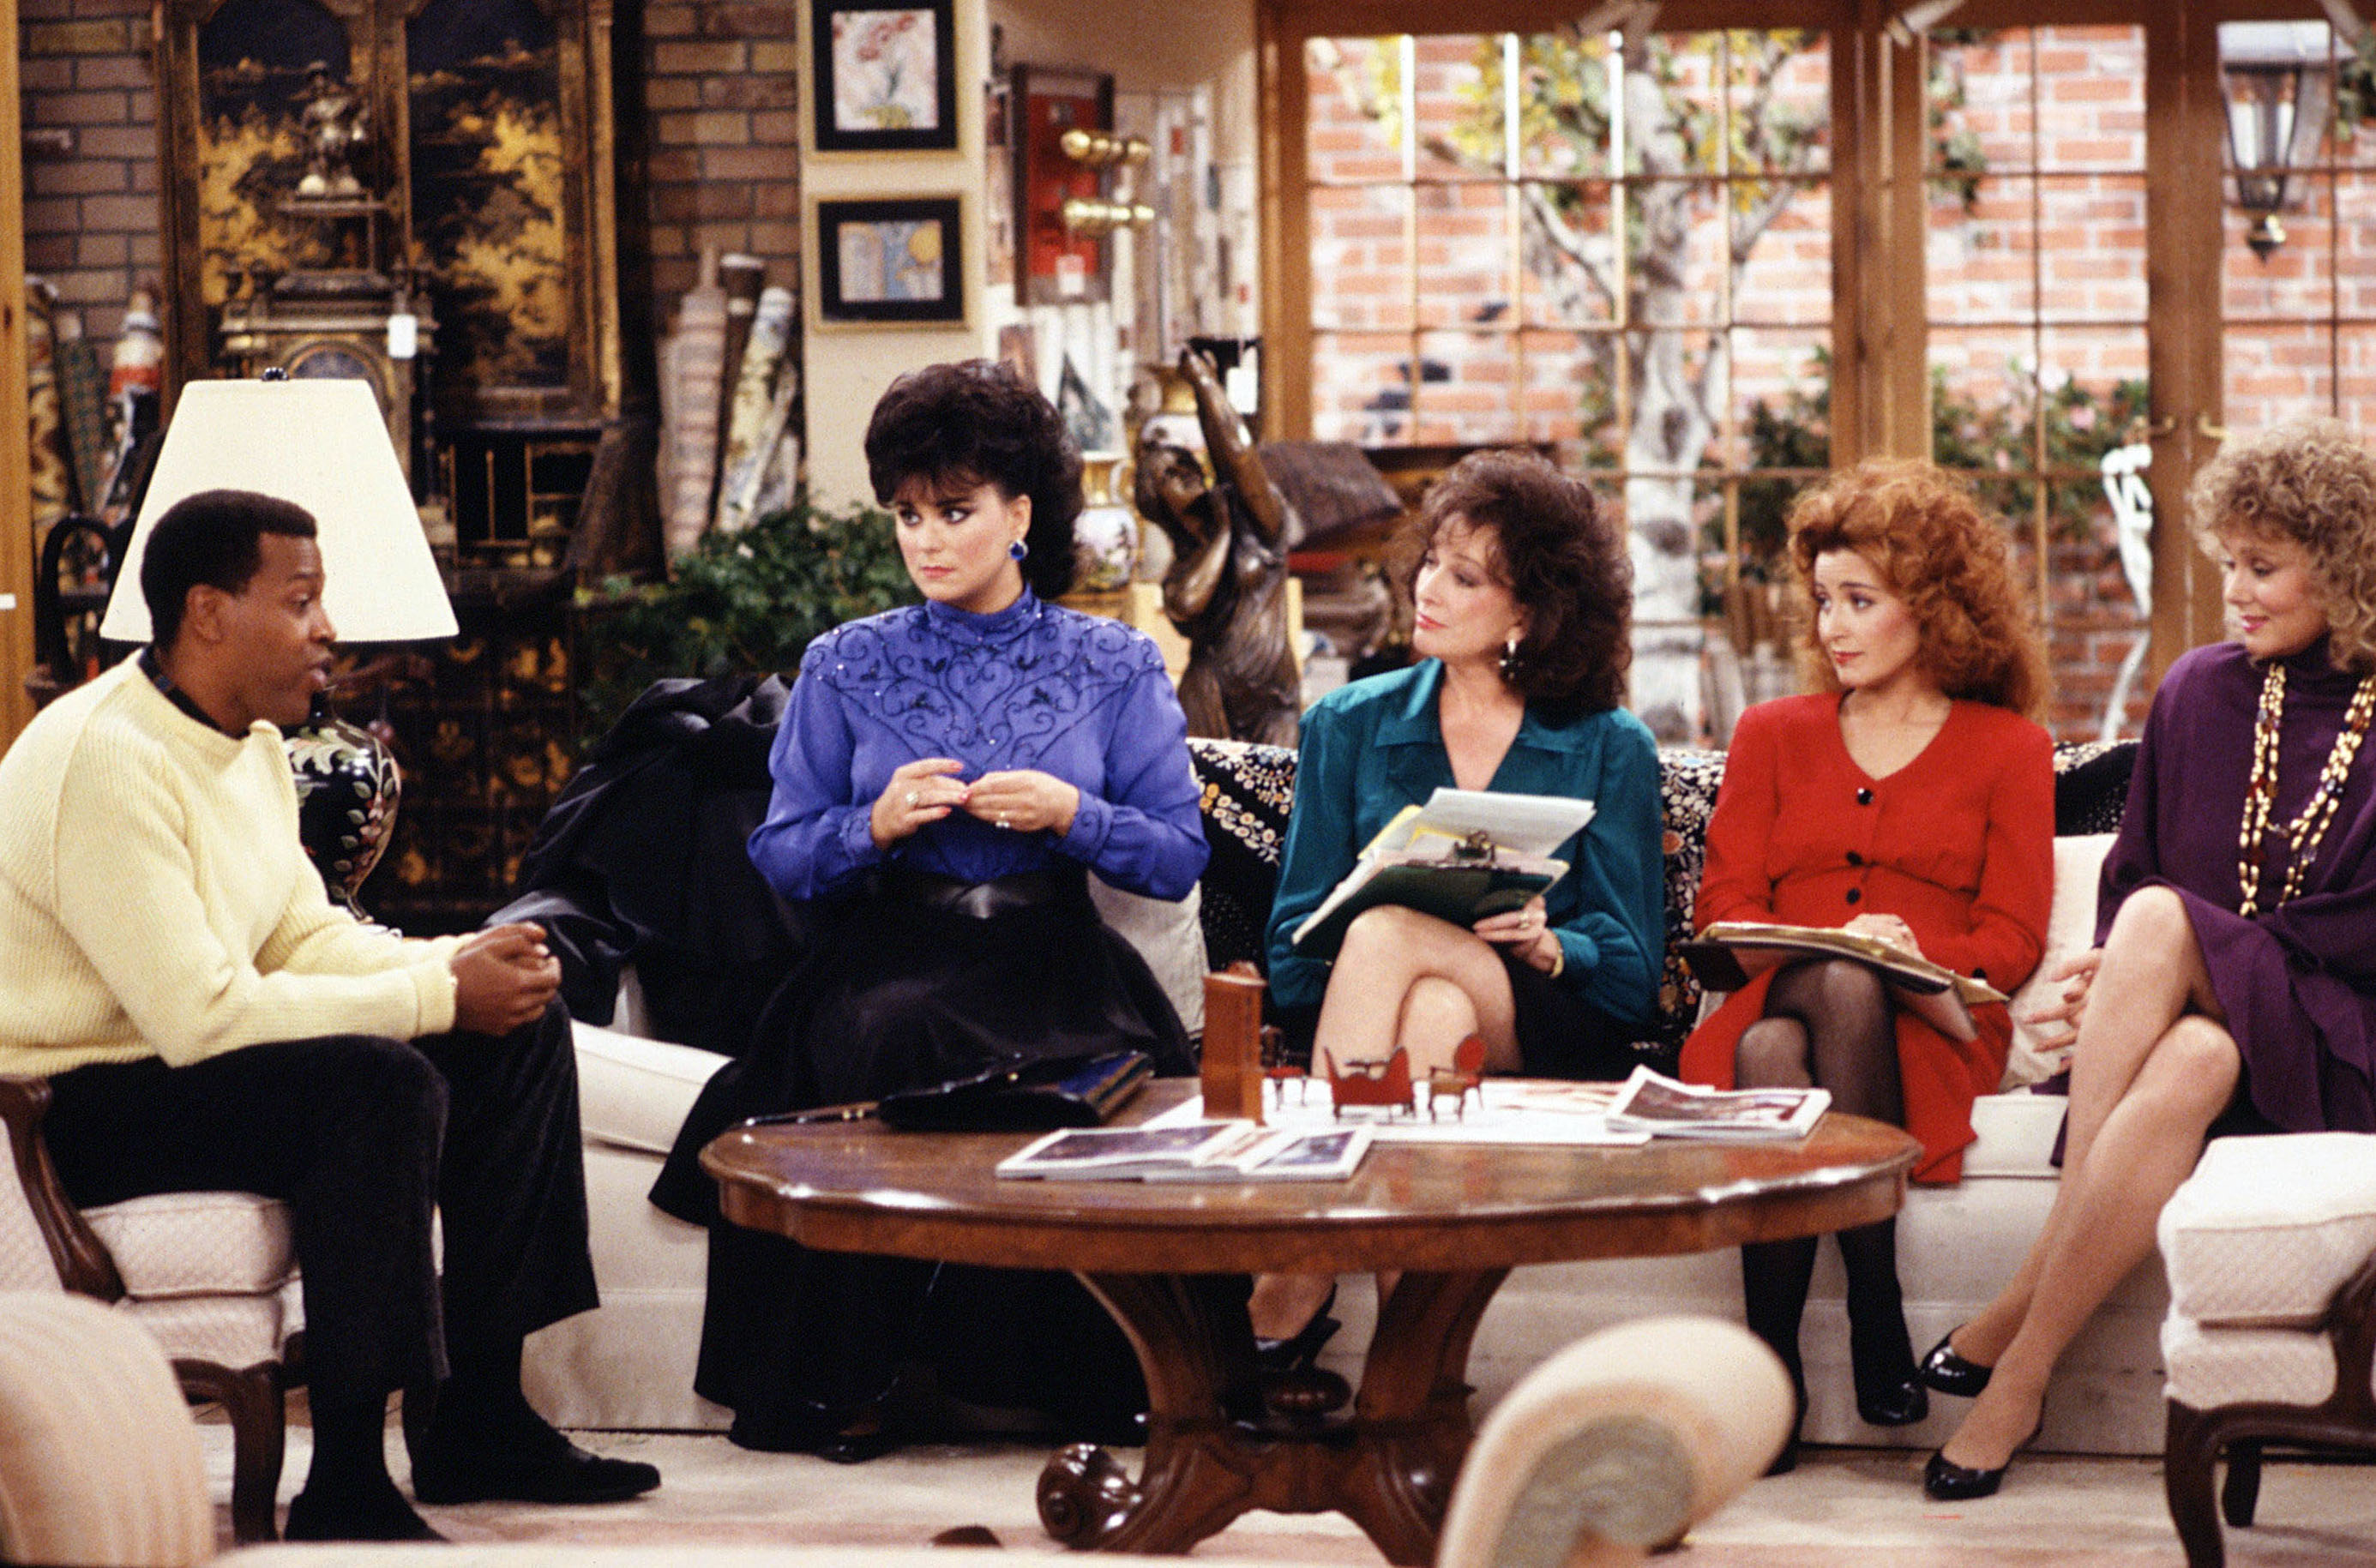 Meshach Taylor, Delta Burke, Dixie Carter, Annie Potts, and Jean Smart on "Designing Women" in 1987 | Source: Getty Images